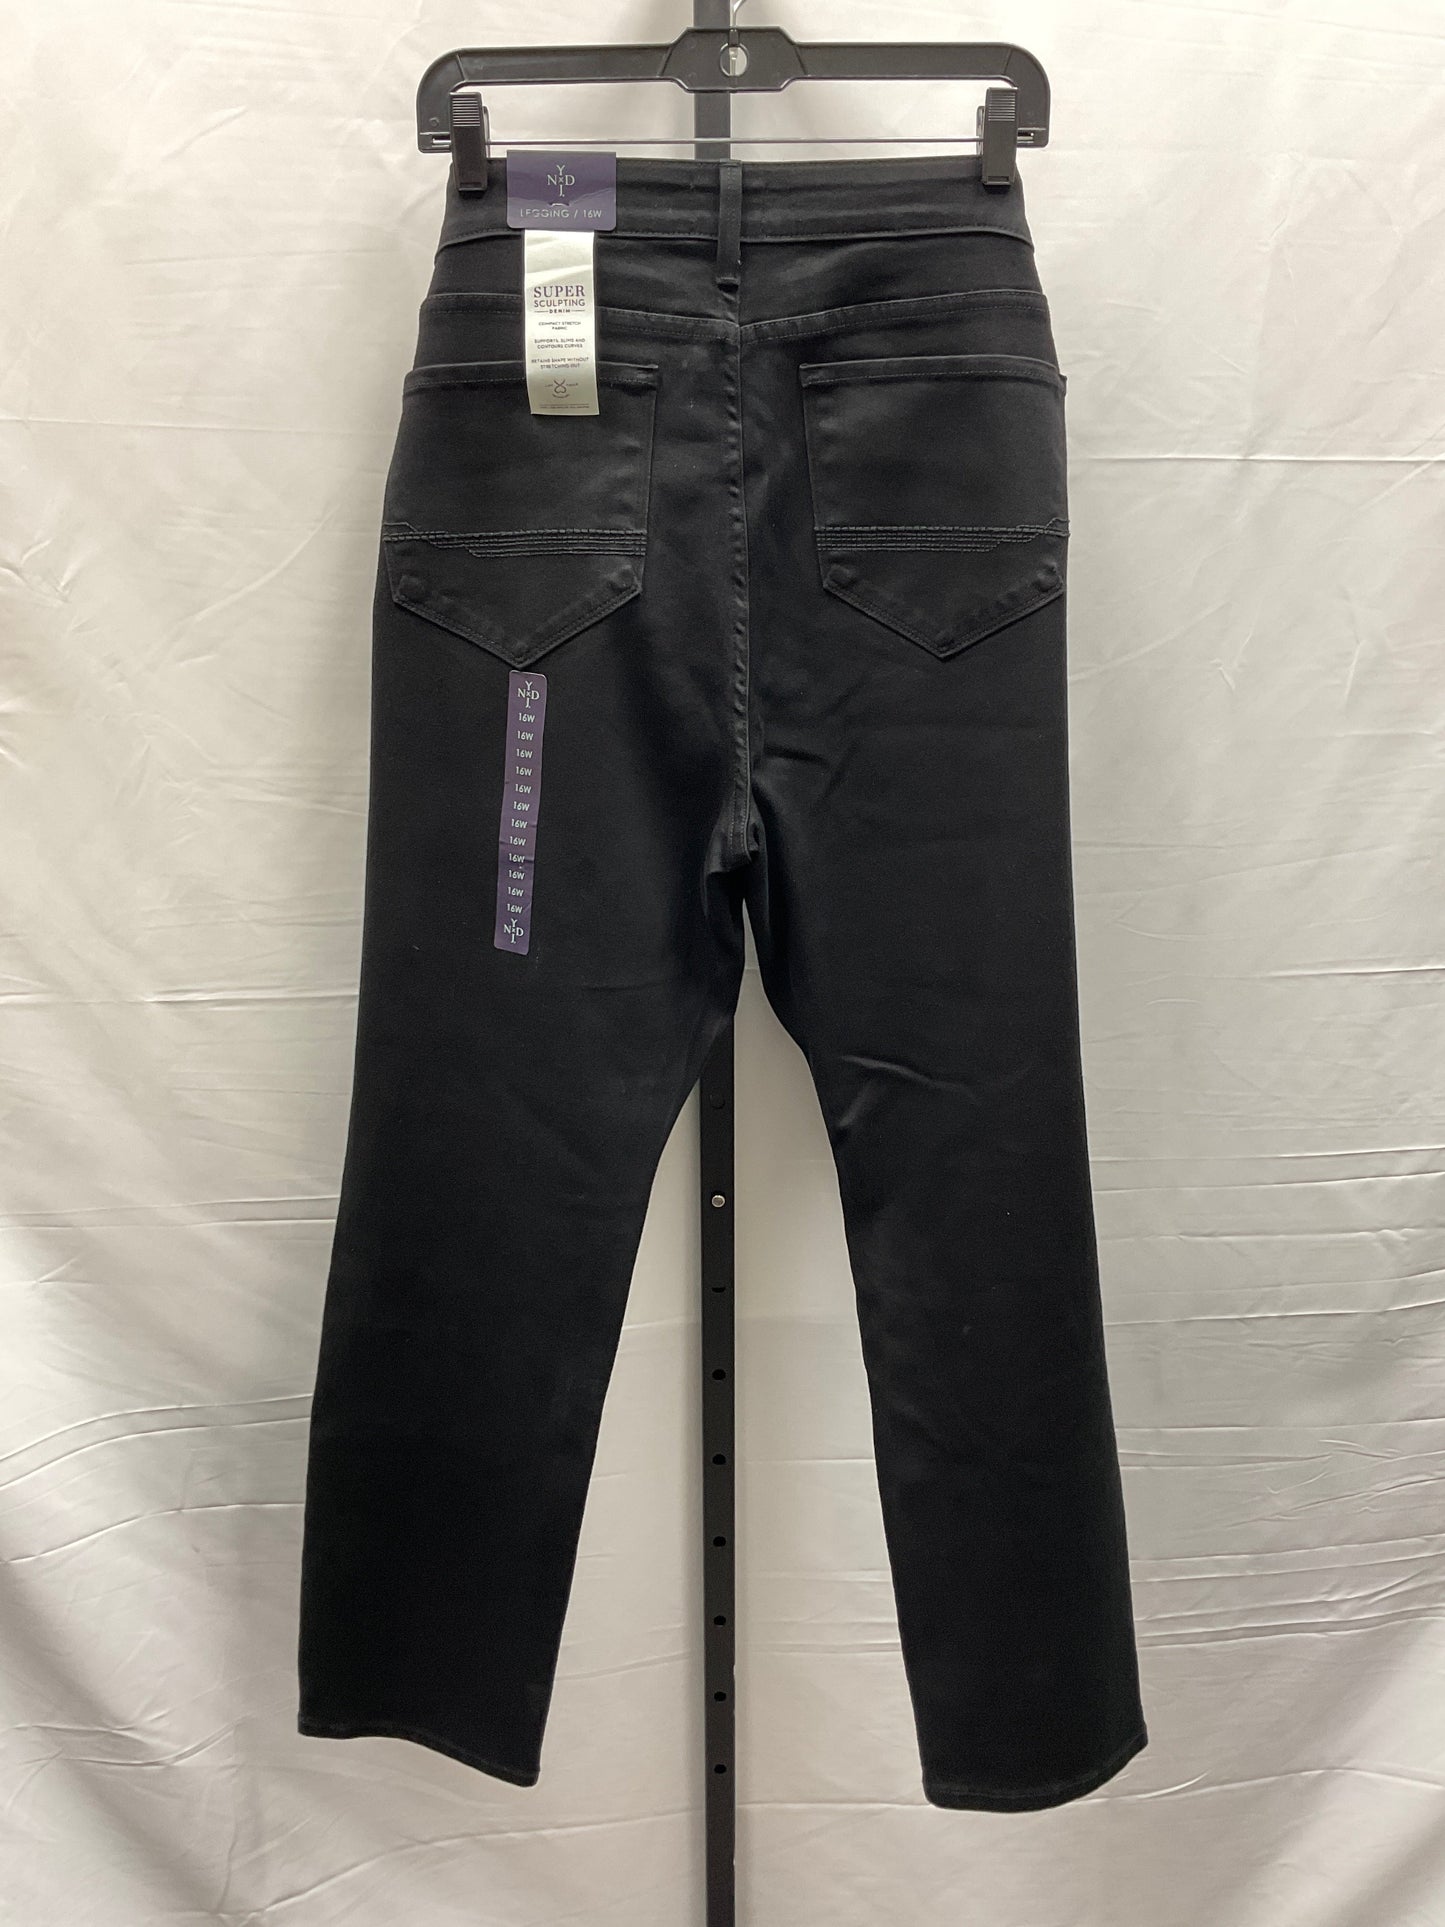 Black Jeans Designer Not Your Daughters Jeans, Size 16